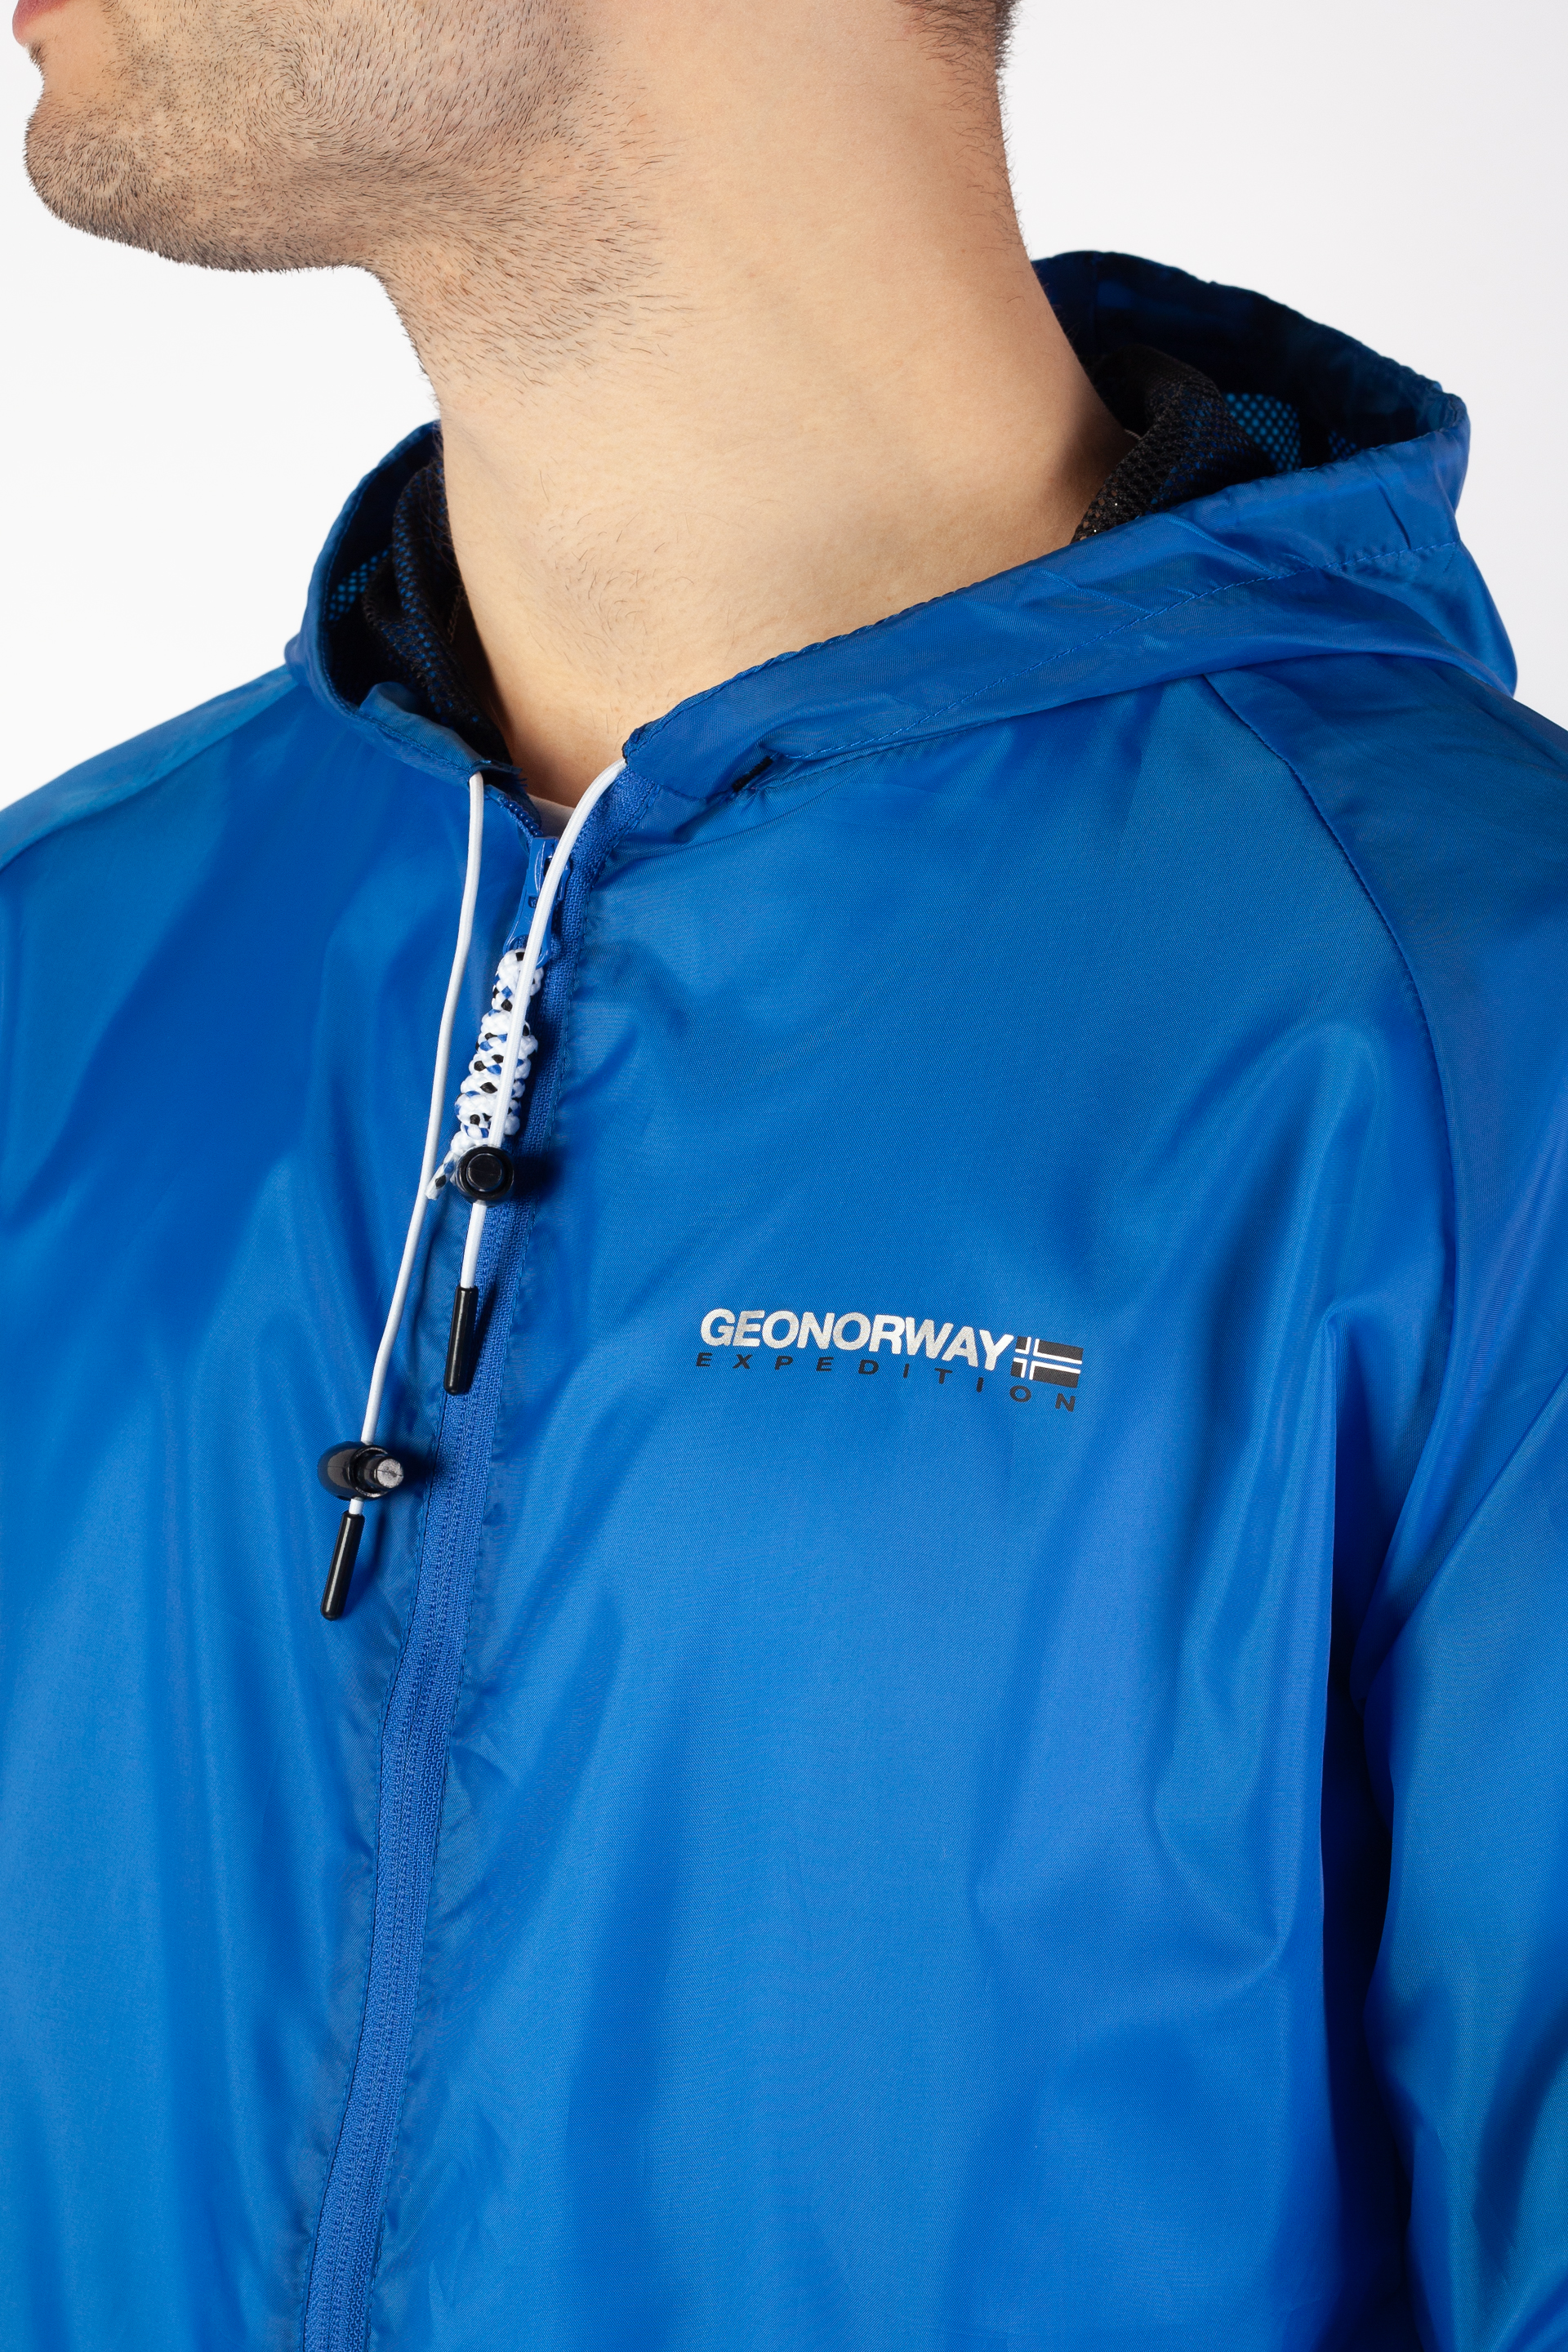 Regenmantel GEOGRAPHICAL NORWAY BOAT-Royal-Blue